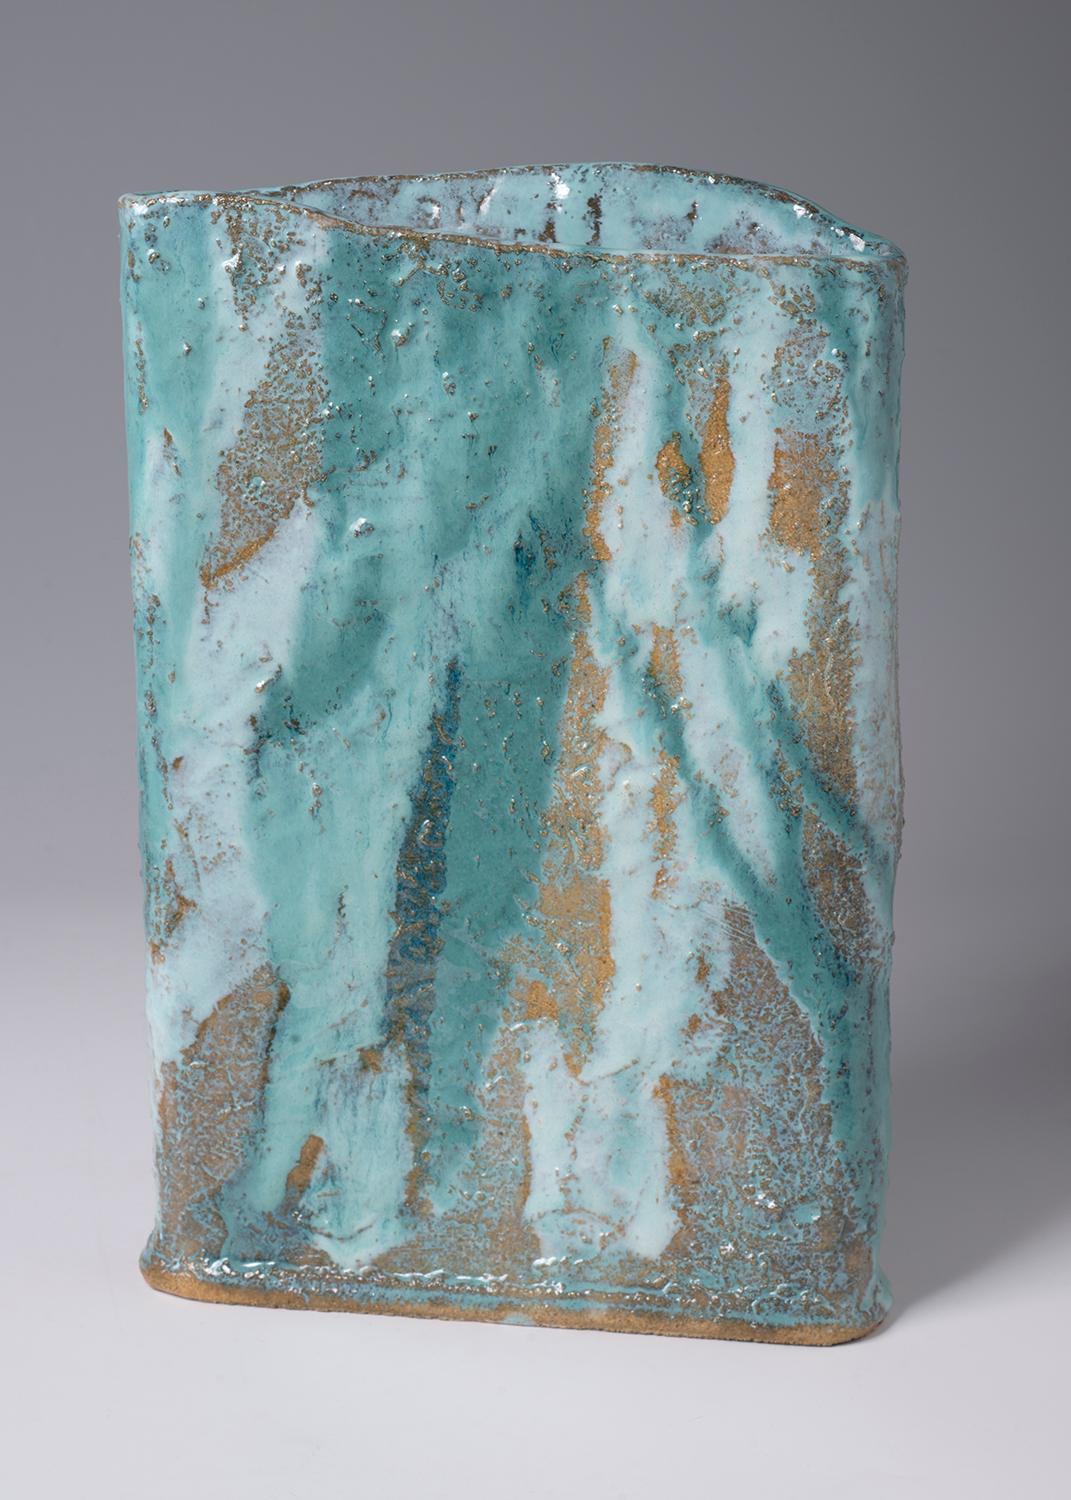 Untitled-  Stoneware vessel glossy green and white glazes by Marc Cohen